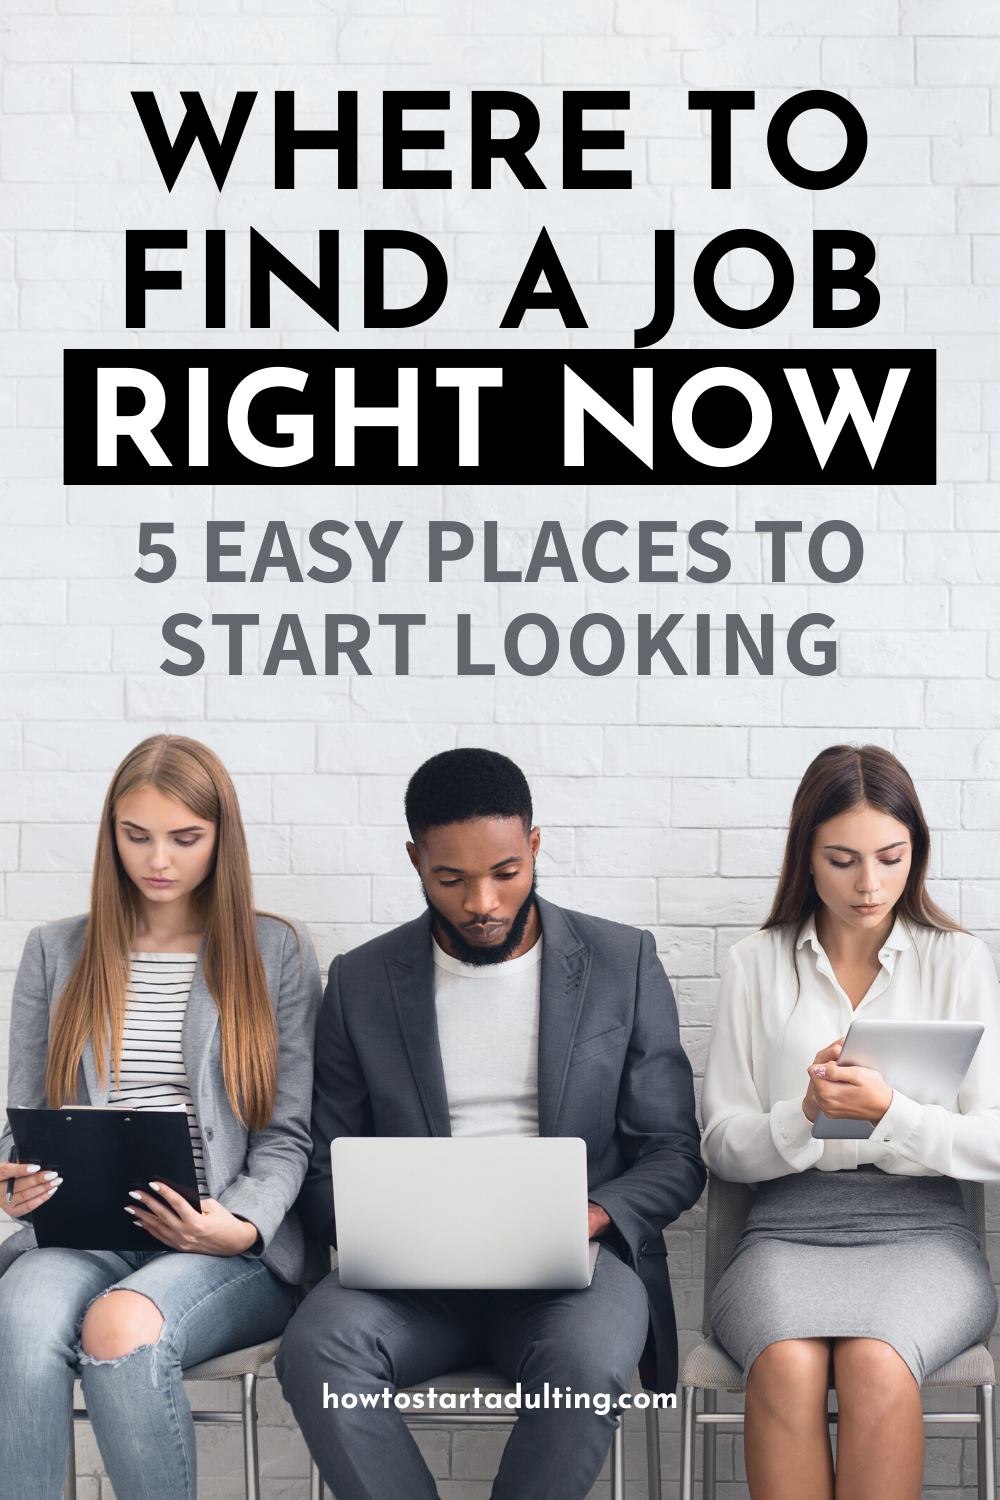 Where To Find A Job Right Now_ 5 Easy Places To Start Looking #jobsearch #jobhunt #career #jobhunting #adulting #careermoves